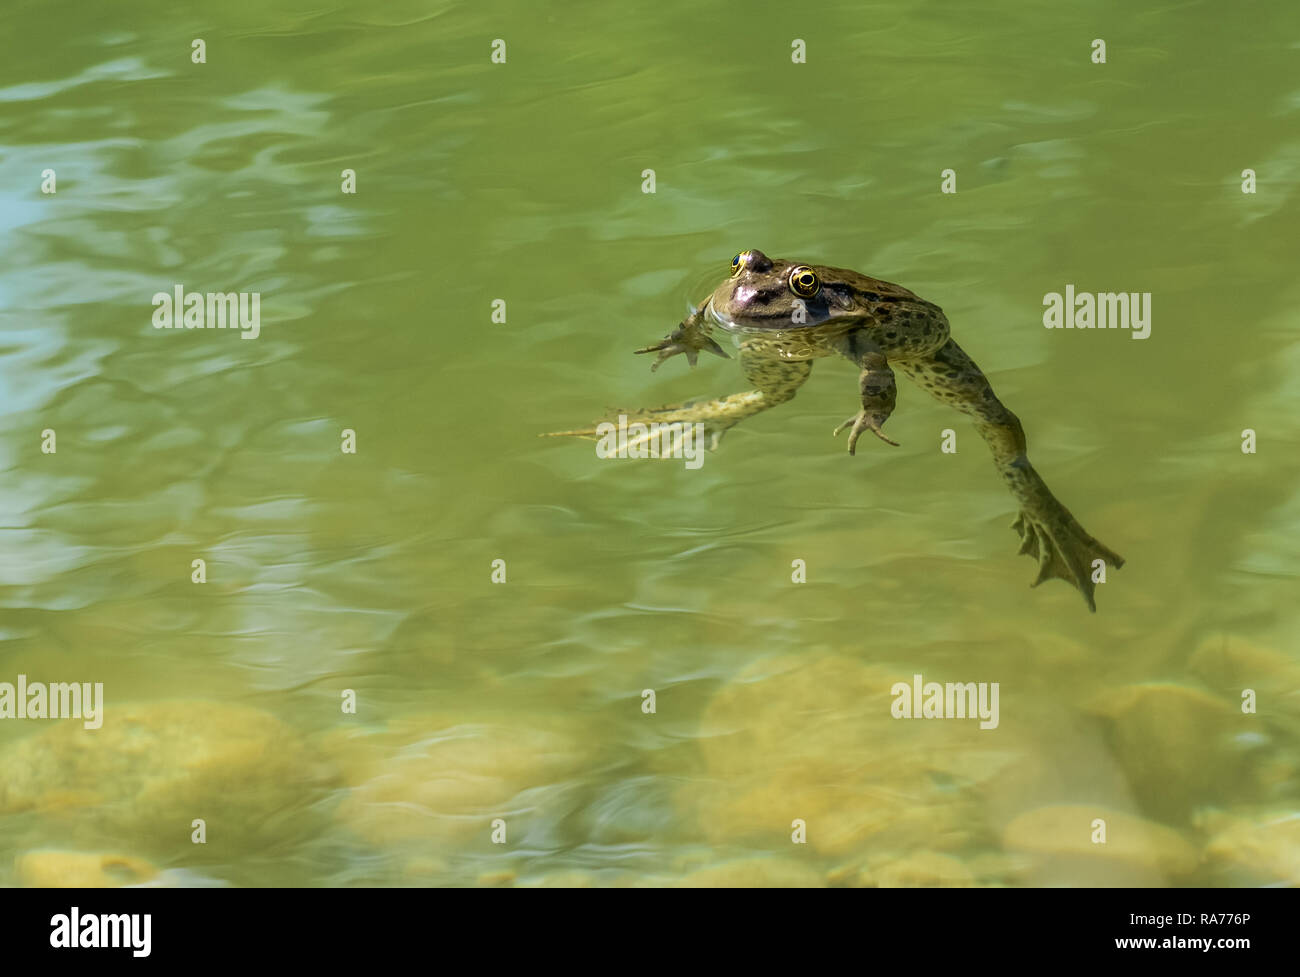 Green frog with large webbed feet Stock Photo - Alamy